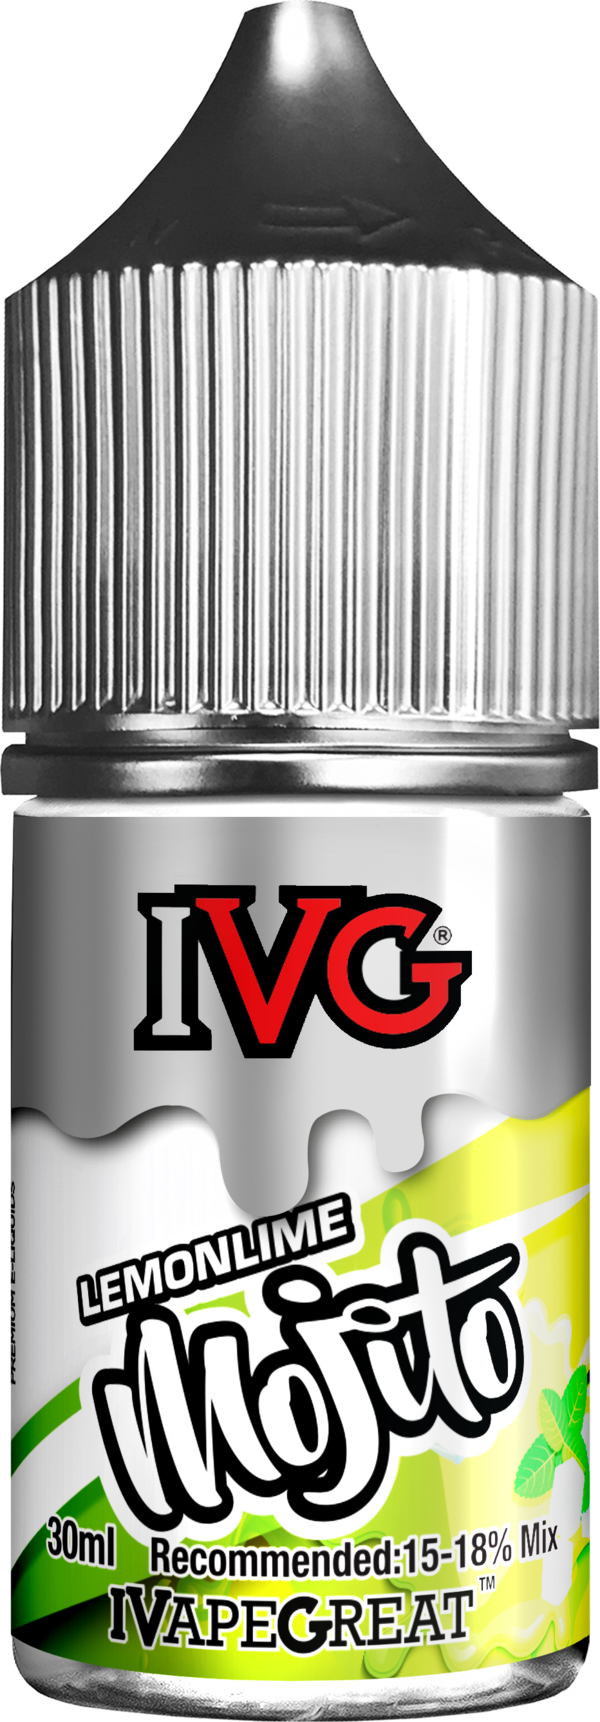 IVG Concentrate 30ml - Lemon Lime Mojito